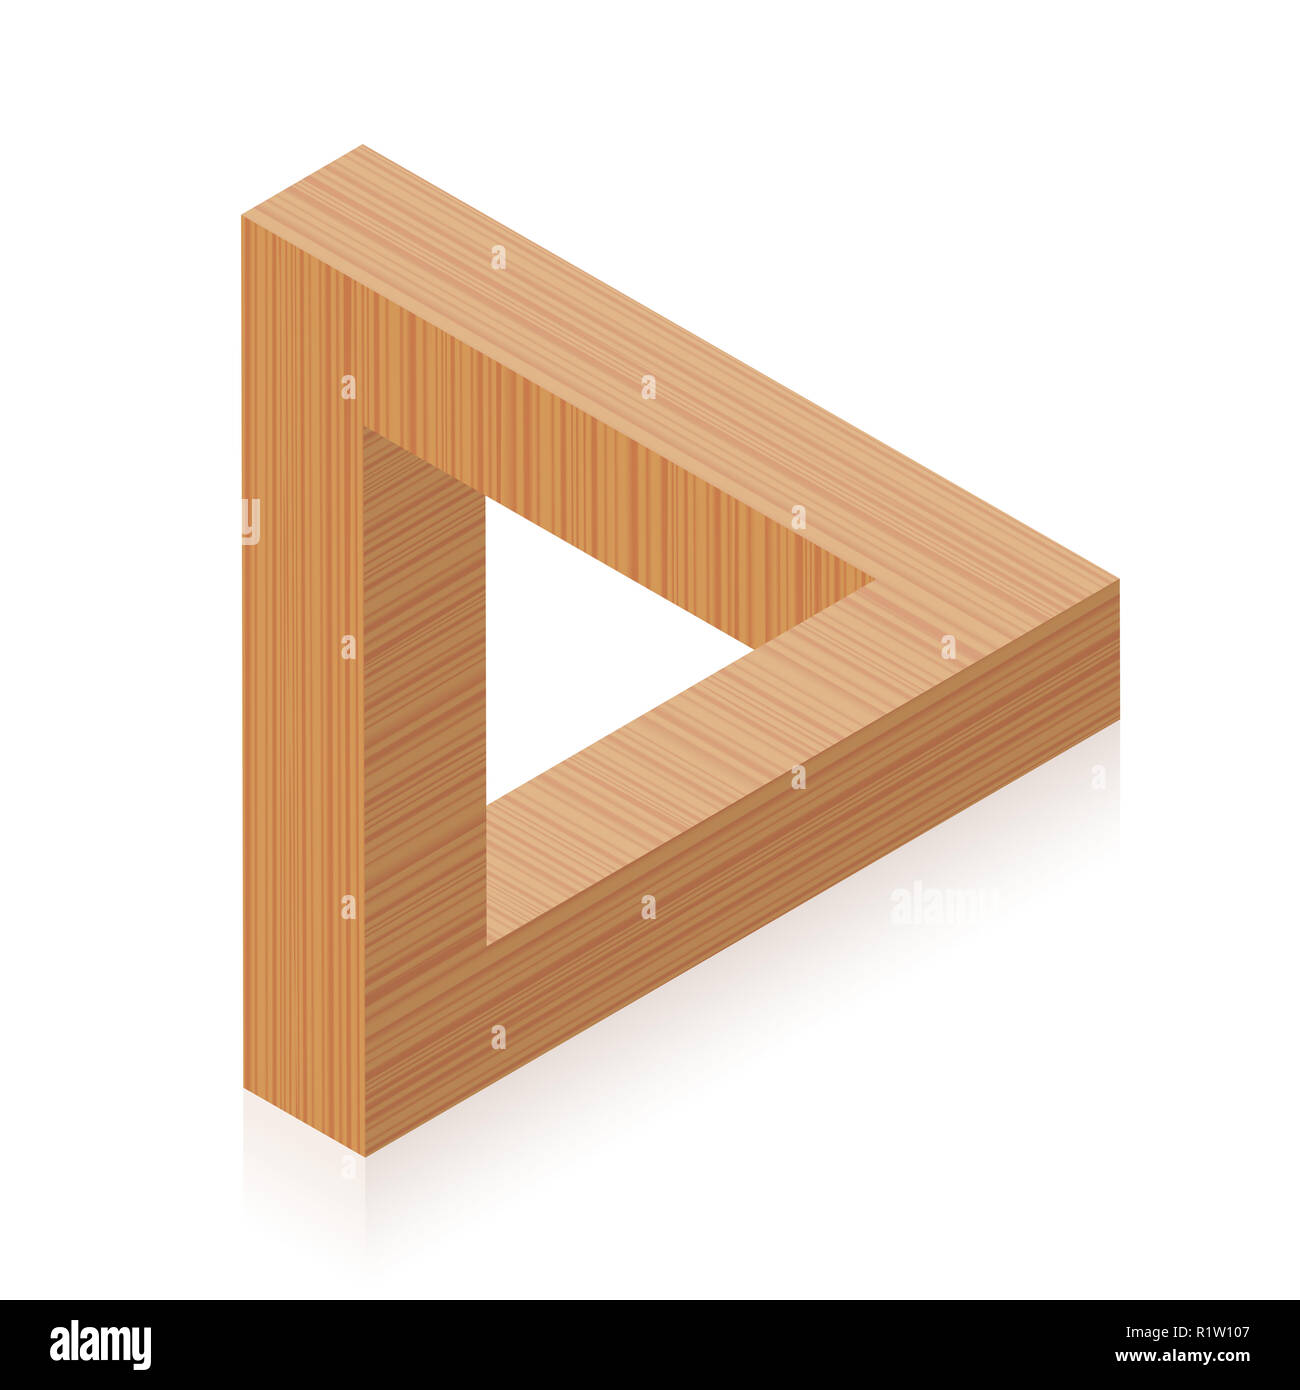 Penrose triangle. Impossible wooden object, appears to be a solid object, made of three straight bars. Stock Photo